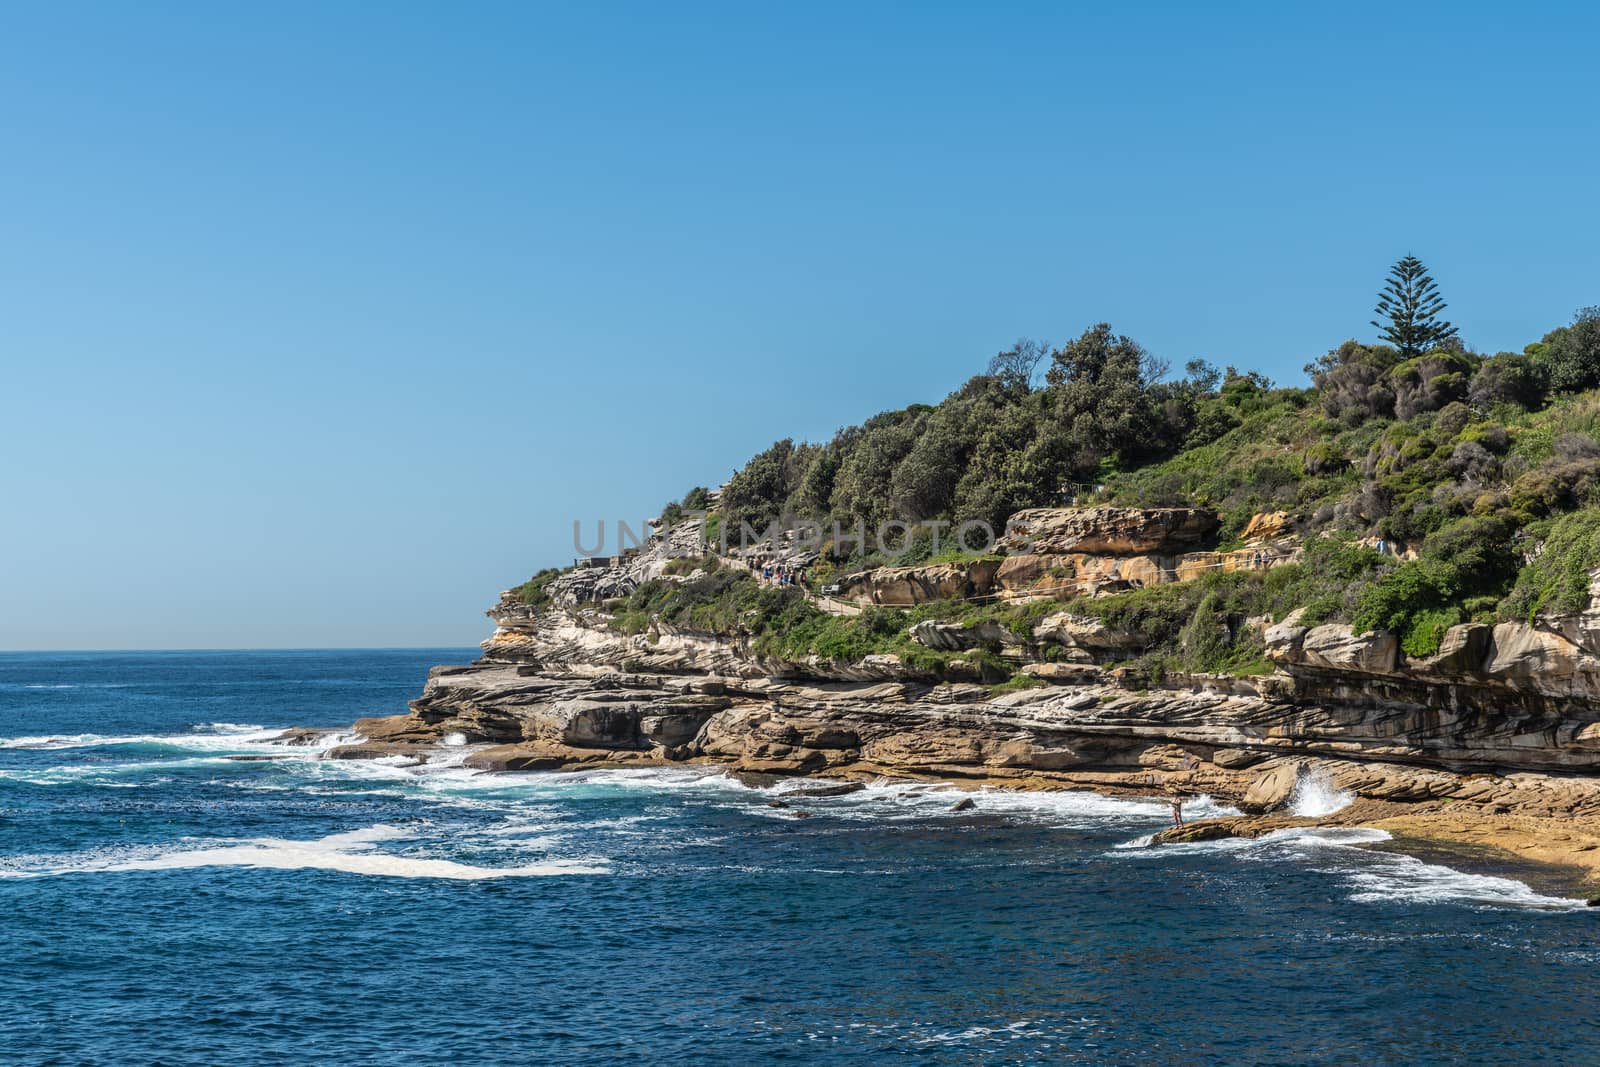 Sydney, Australia - February 11, 2019:  South side rocks and cliffs at Bondi beach. Green vegetation on top. People walking on path. Blue water and sky.